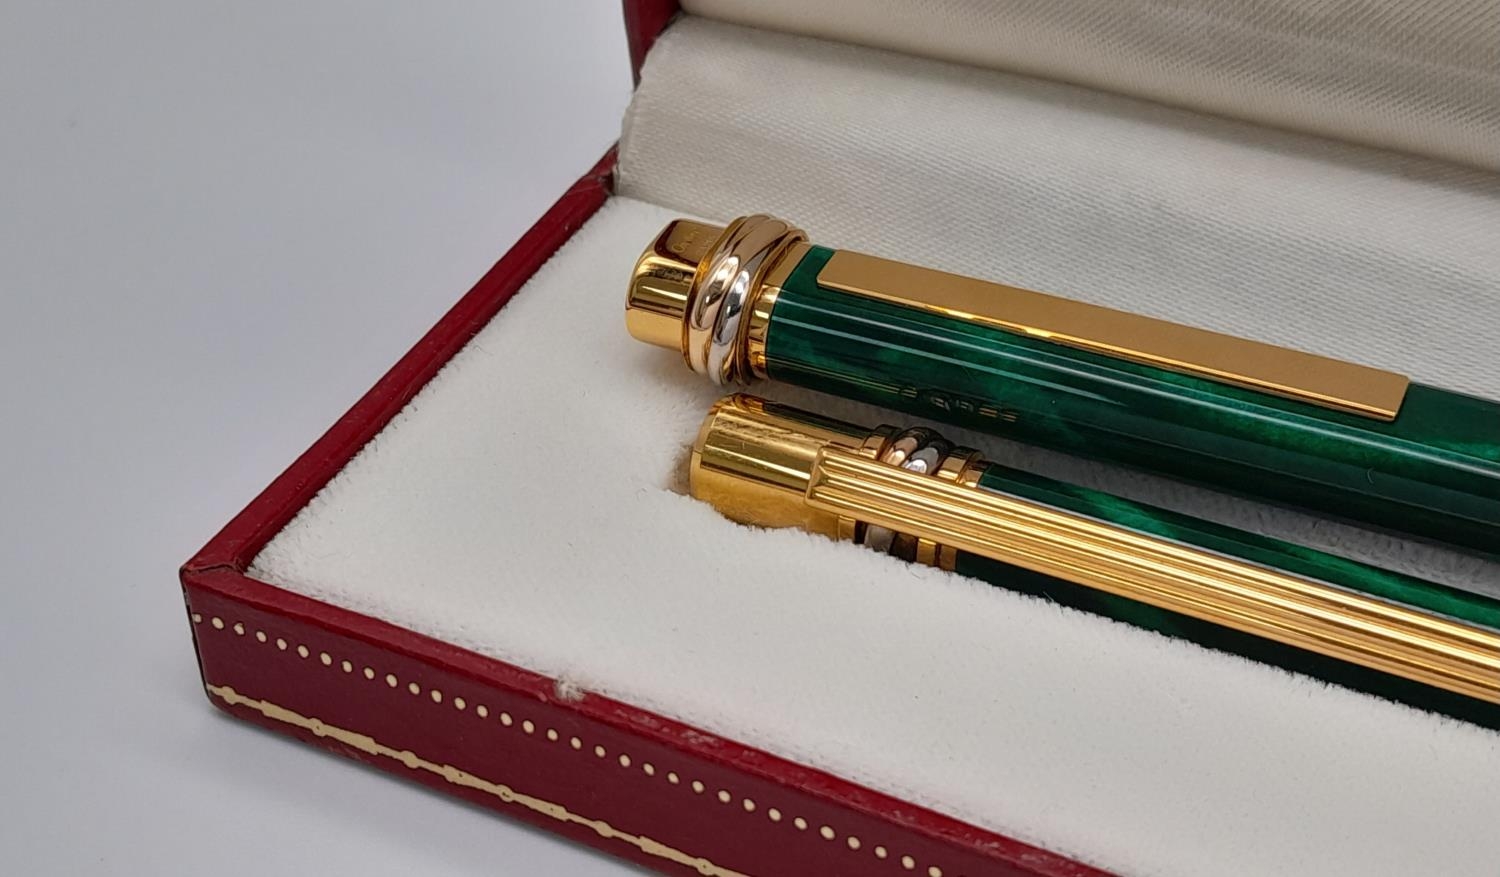 A Must de Cartier Fountain and Ballpoint Set of Pens. Malachite lacquer decoration. Ref: 017182 - Image 2 of 9